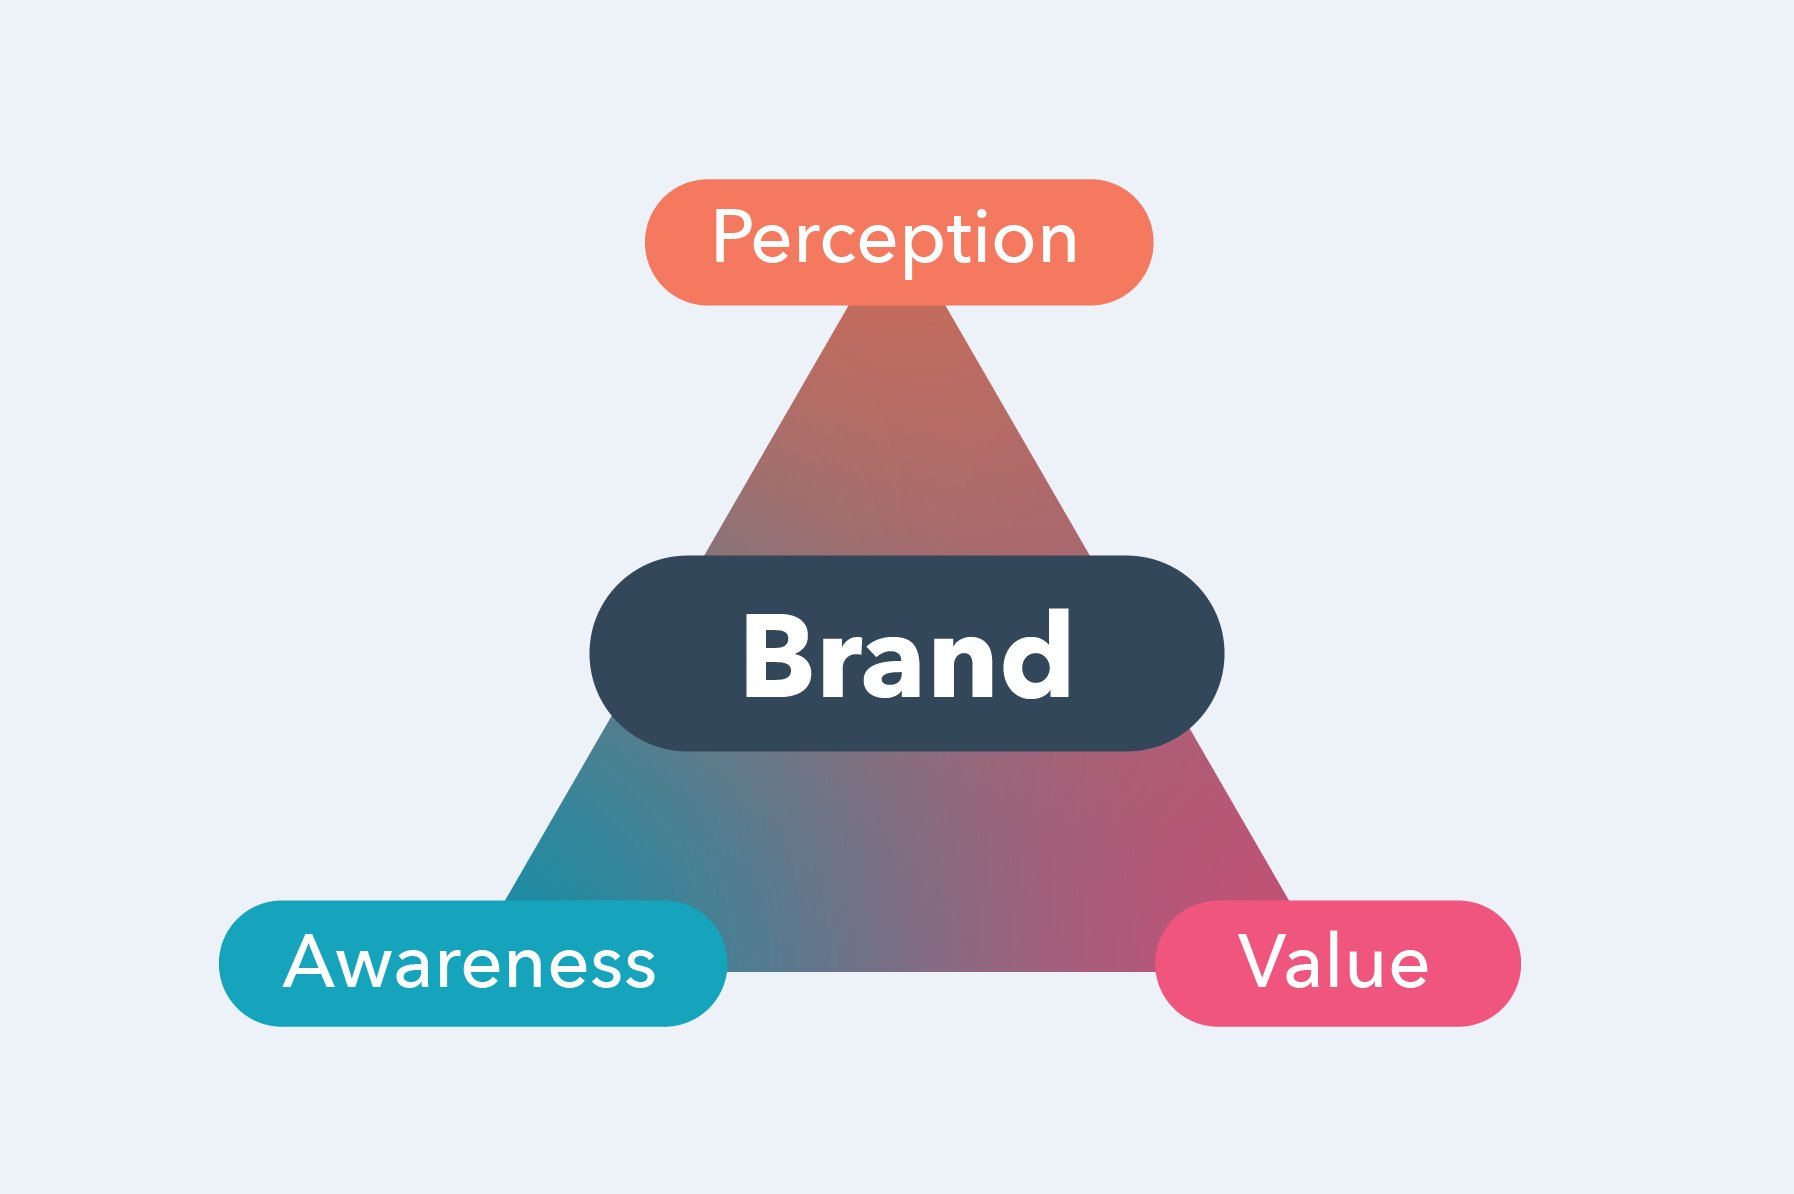 How to Understand the Value of Brand perception